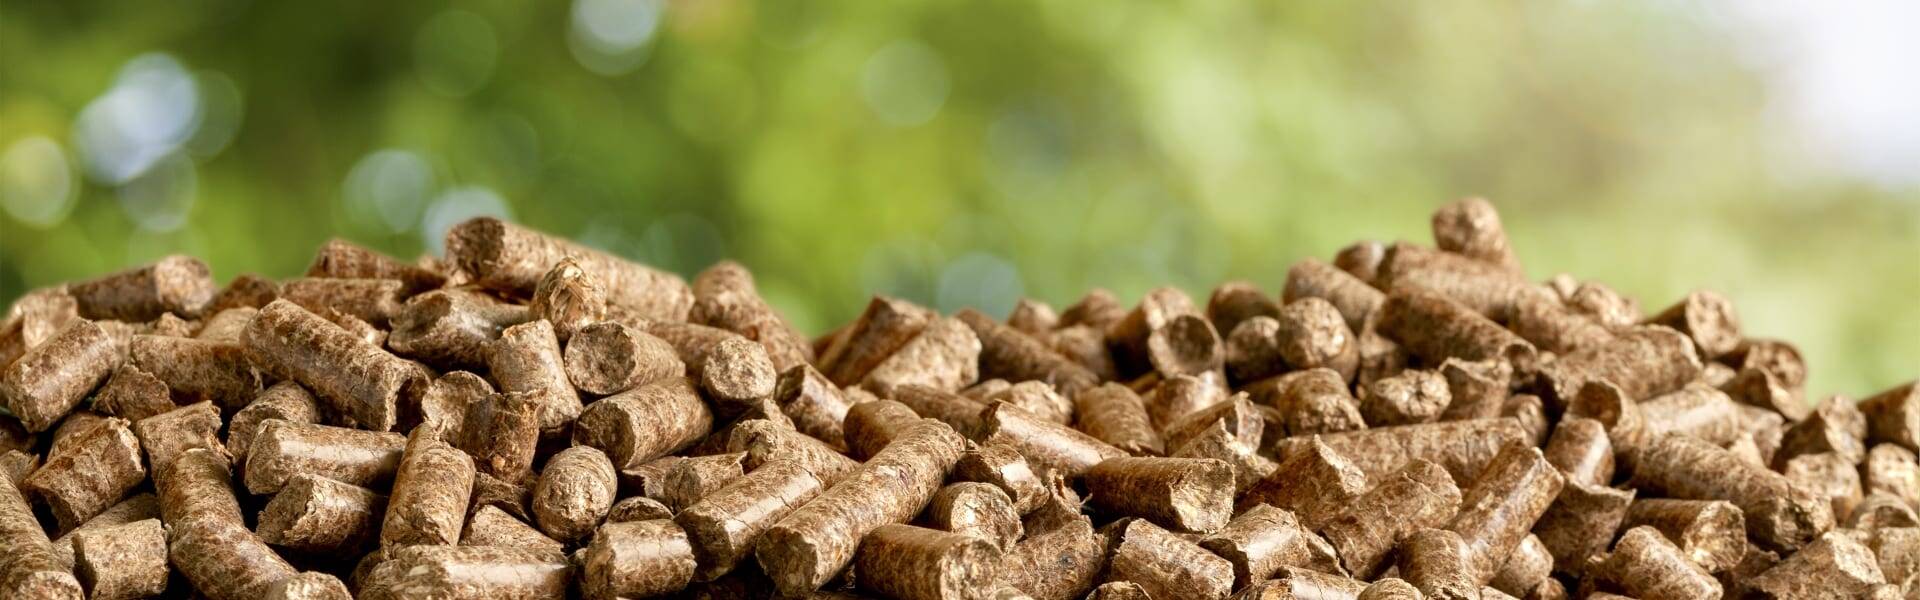 Drax keen to push ahead with conversion plans despite biomass subsidy cuts